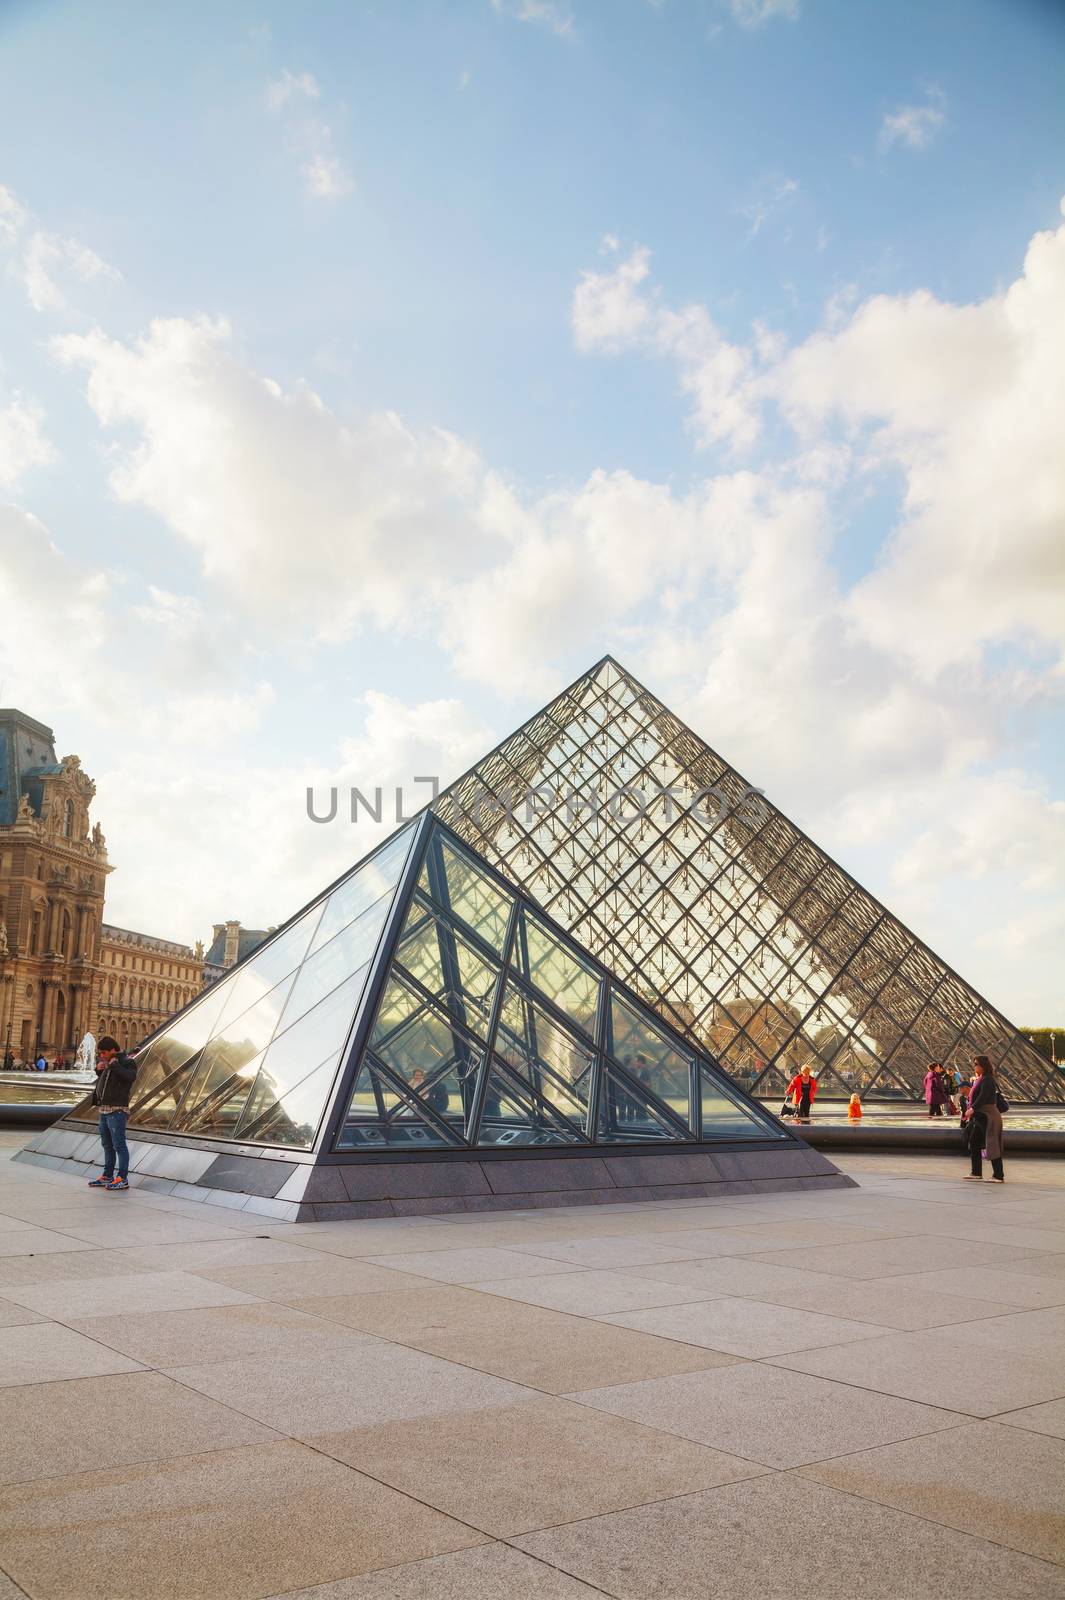 The Louvre Pyramid in Paris by AndreyKr